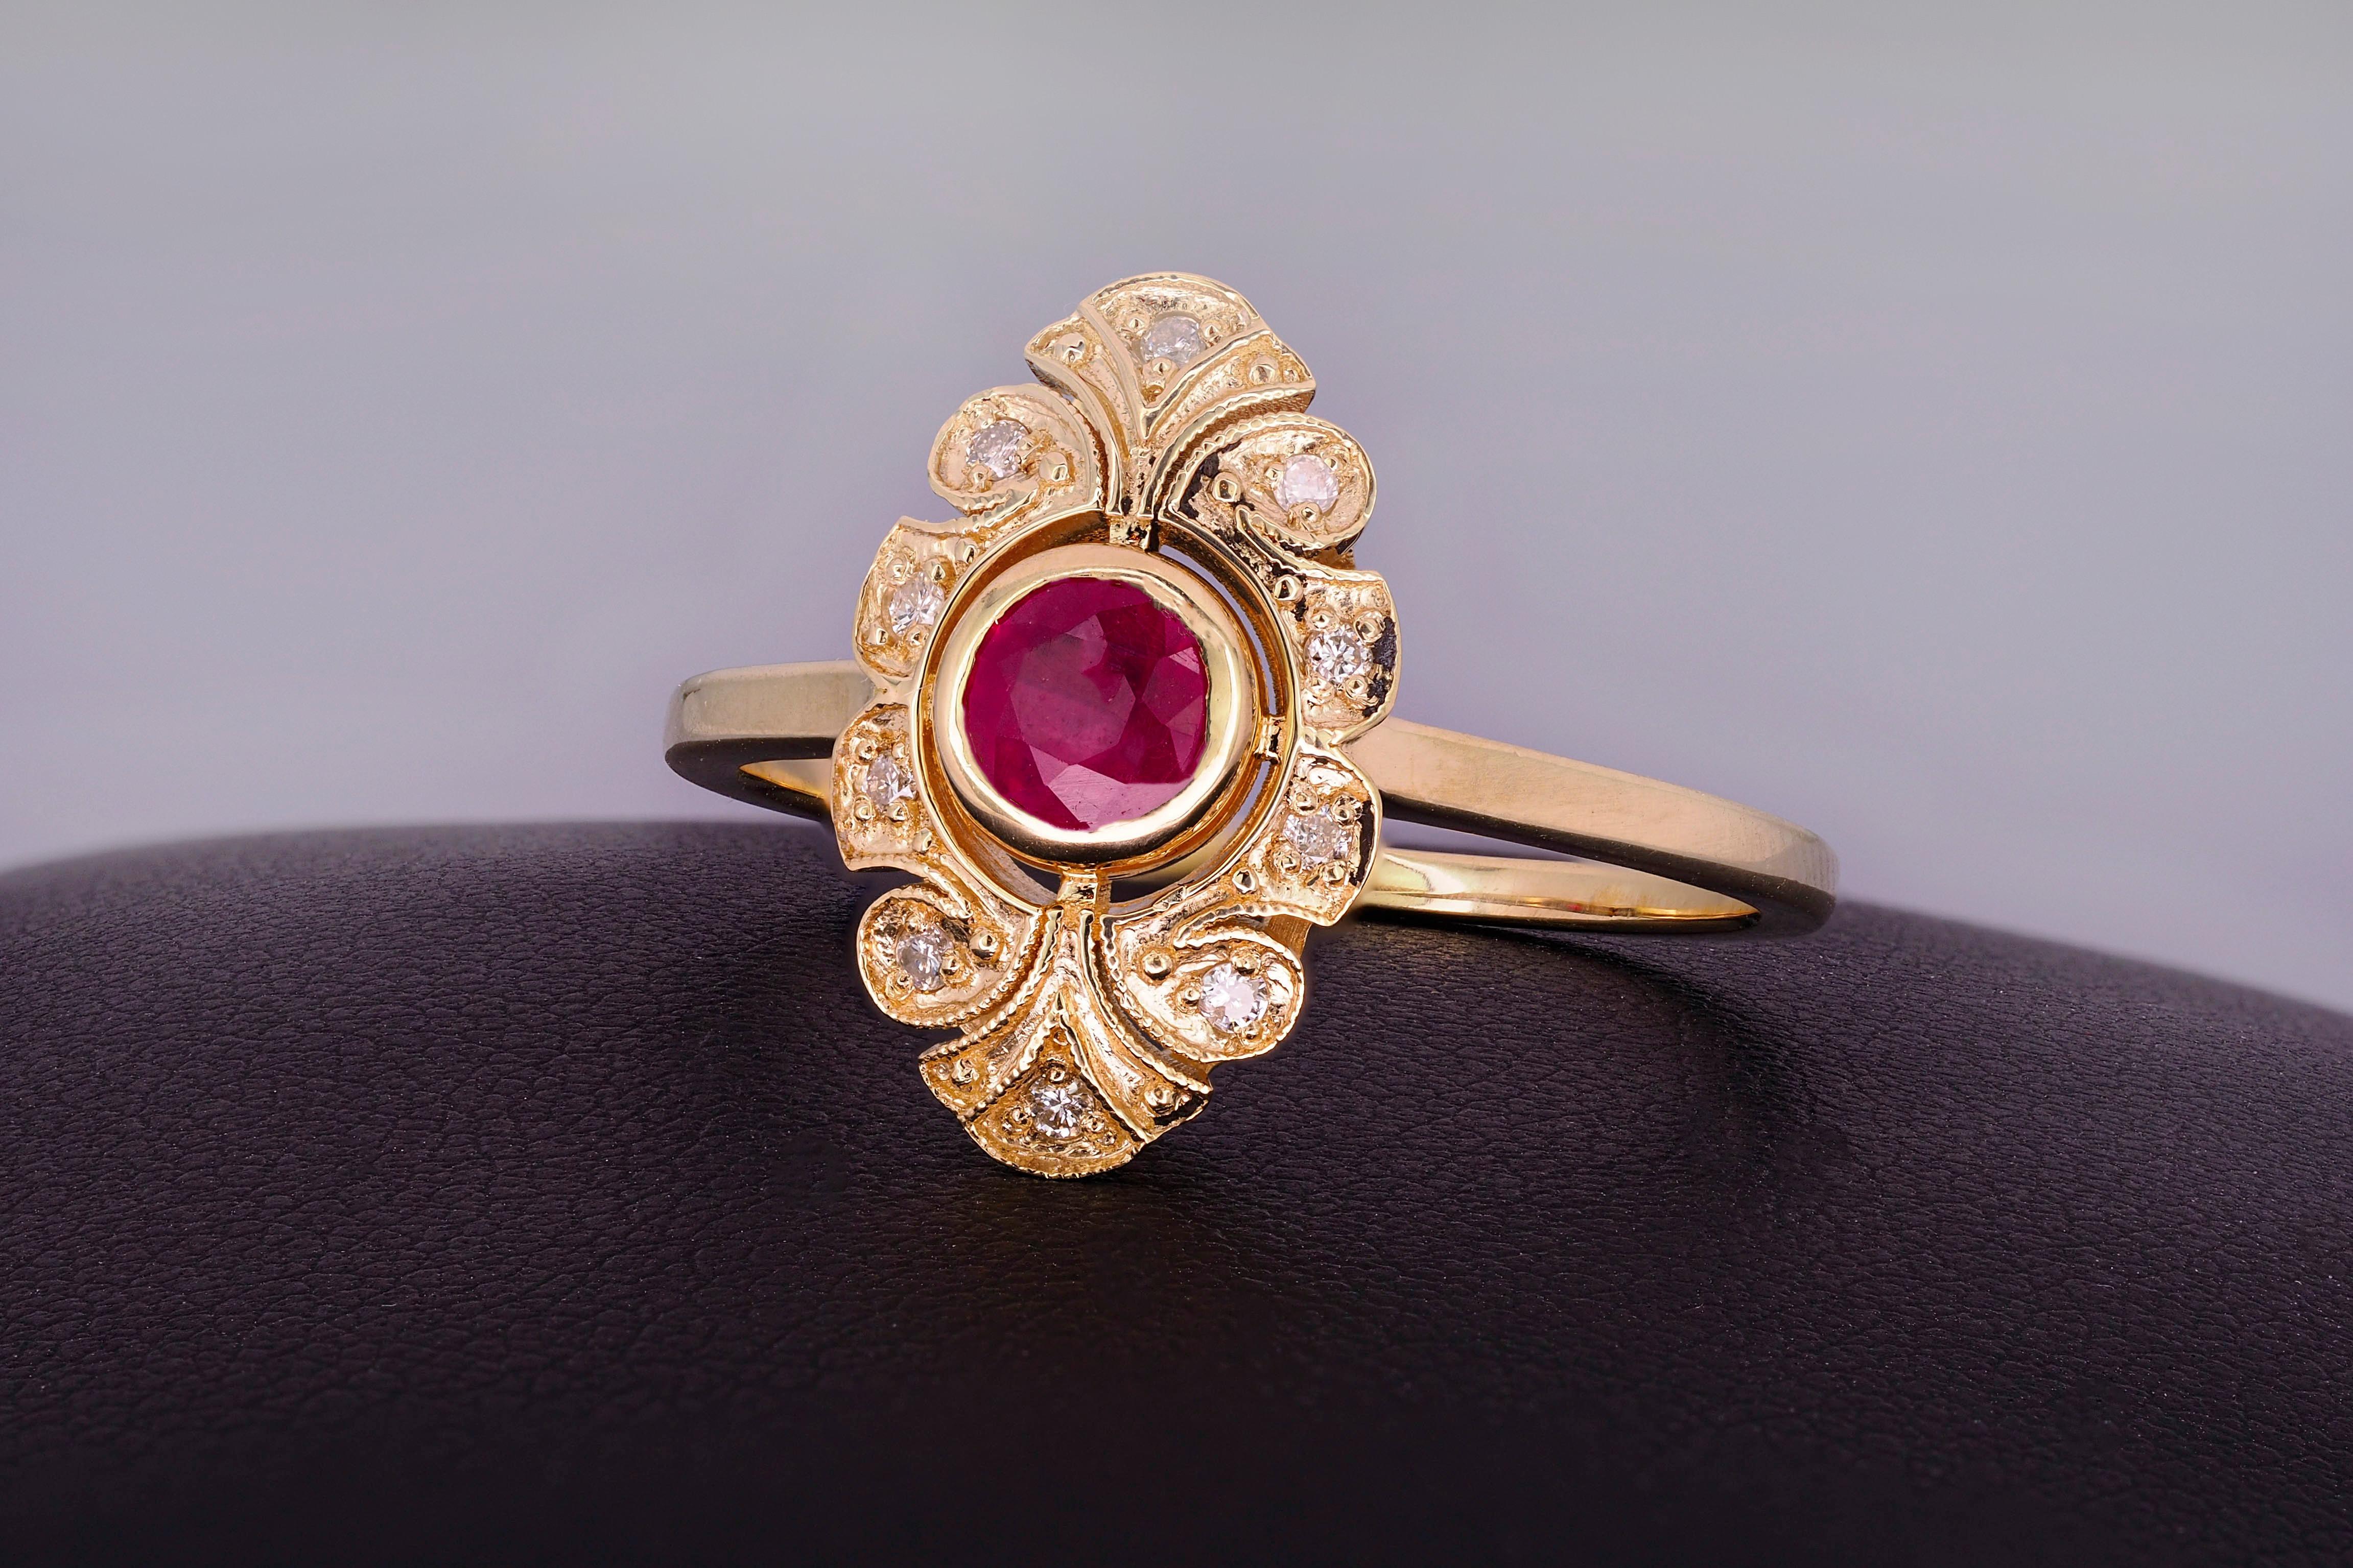 For Sale:  14 karat Gold Ring with Ruby and Diamonds, Vintage Inspired Ring.  8